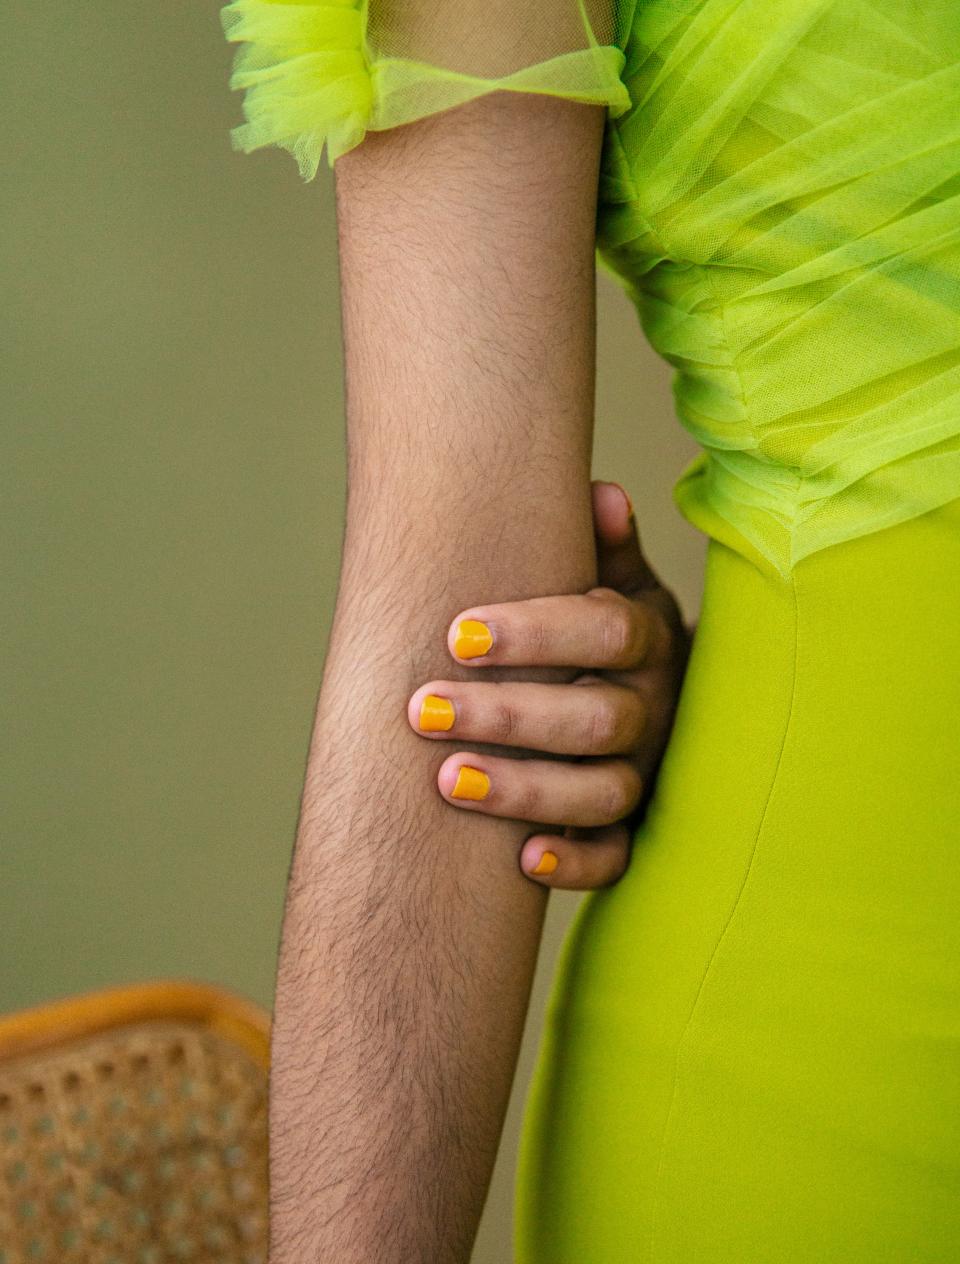 Seven people showed off their arm hair in striking portraits and opened up about their relationships with it in this portrait series for Allure. Their stories show our relationships with our hair are both culturally influenced and intensely personal.